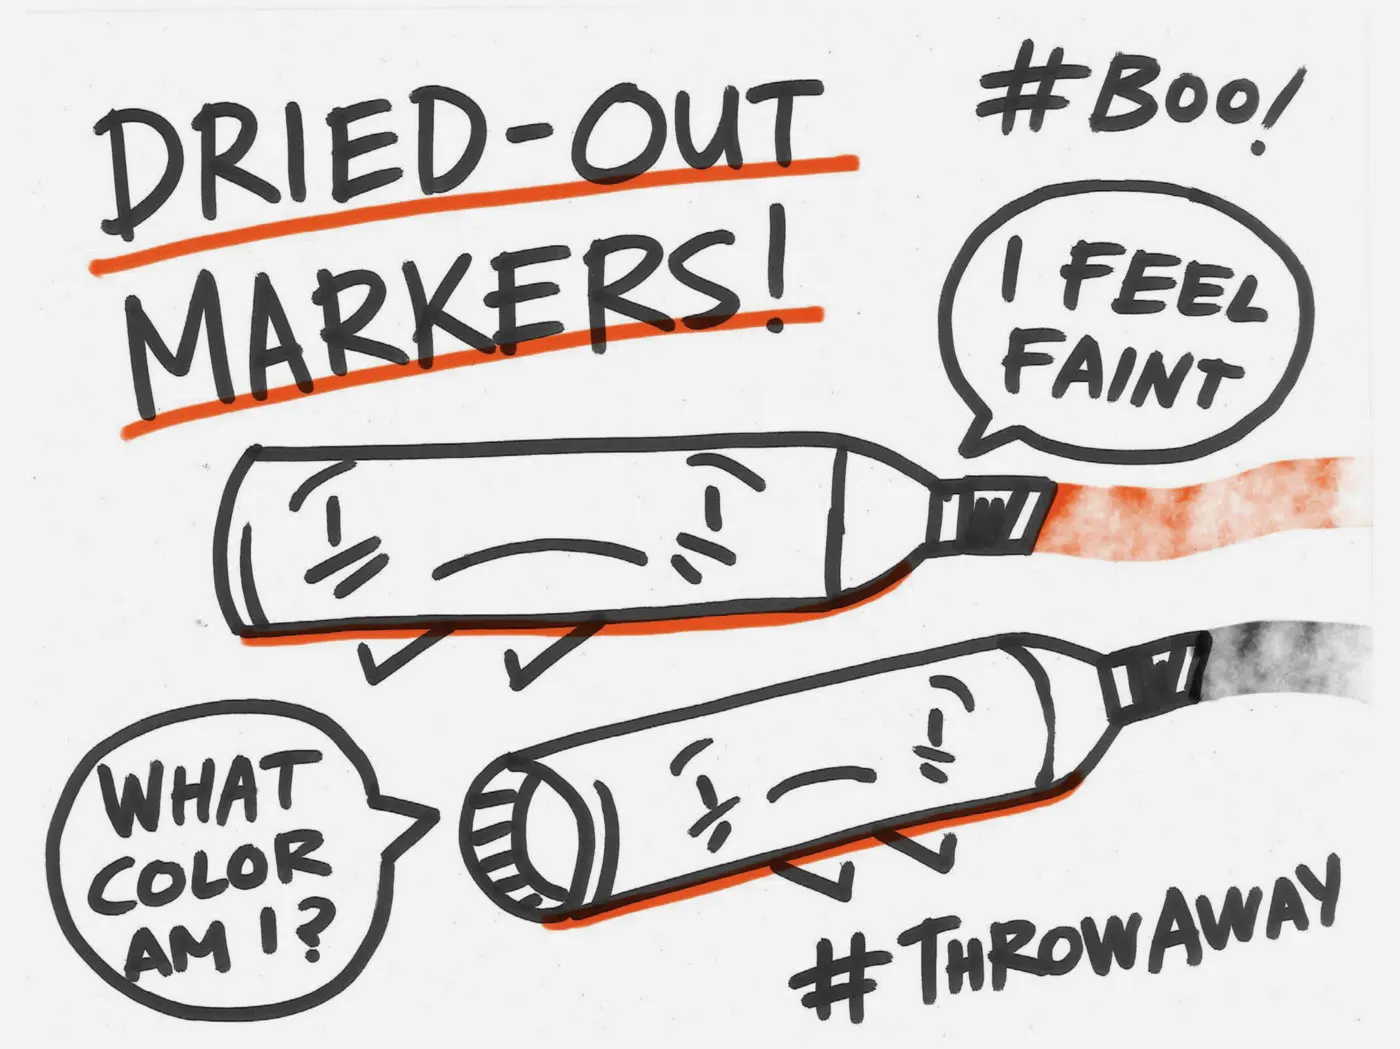 Black marker sketch with the heading "Dried-out Markers!" with drawings of markers and the phrases "I feel faint," What color am I?," and "#ThrowAway."